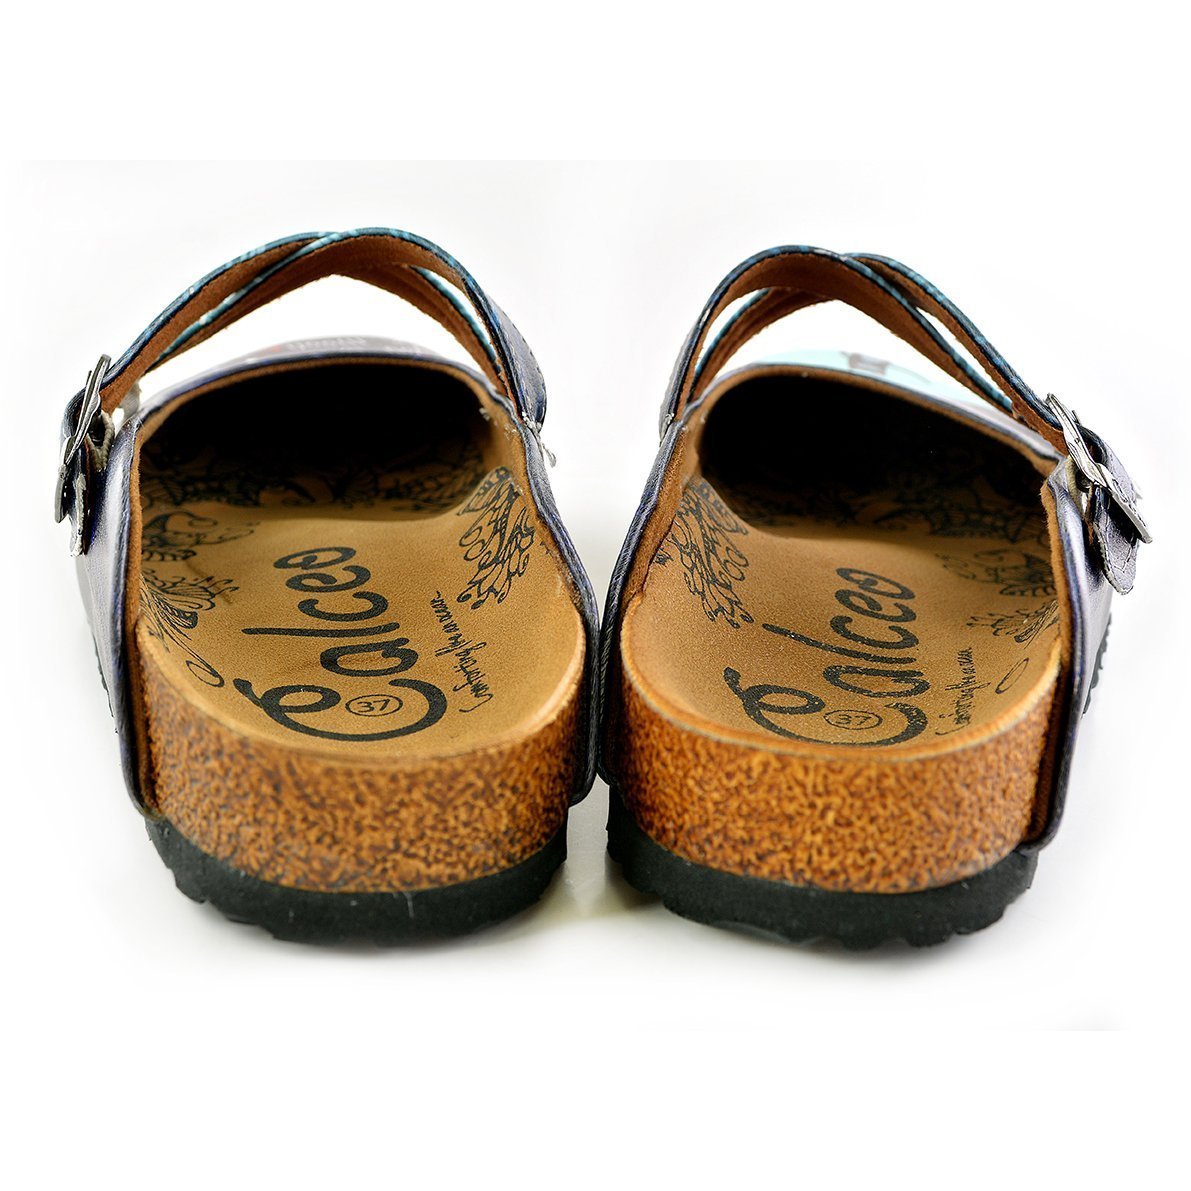 Blue "I Love You To The Moon & Back Clogs WCAL138 (737672200288)